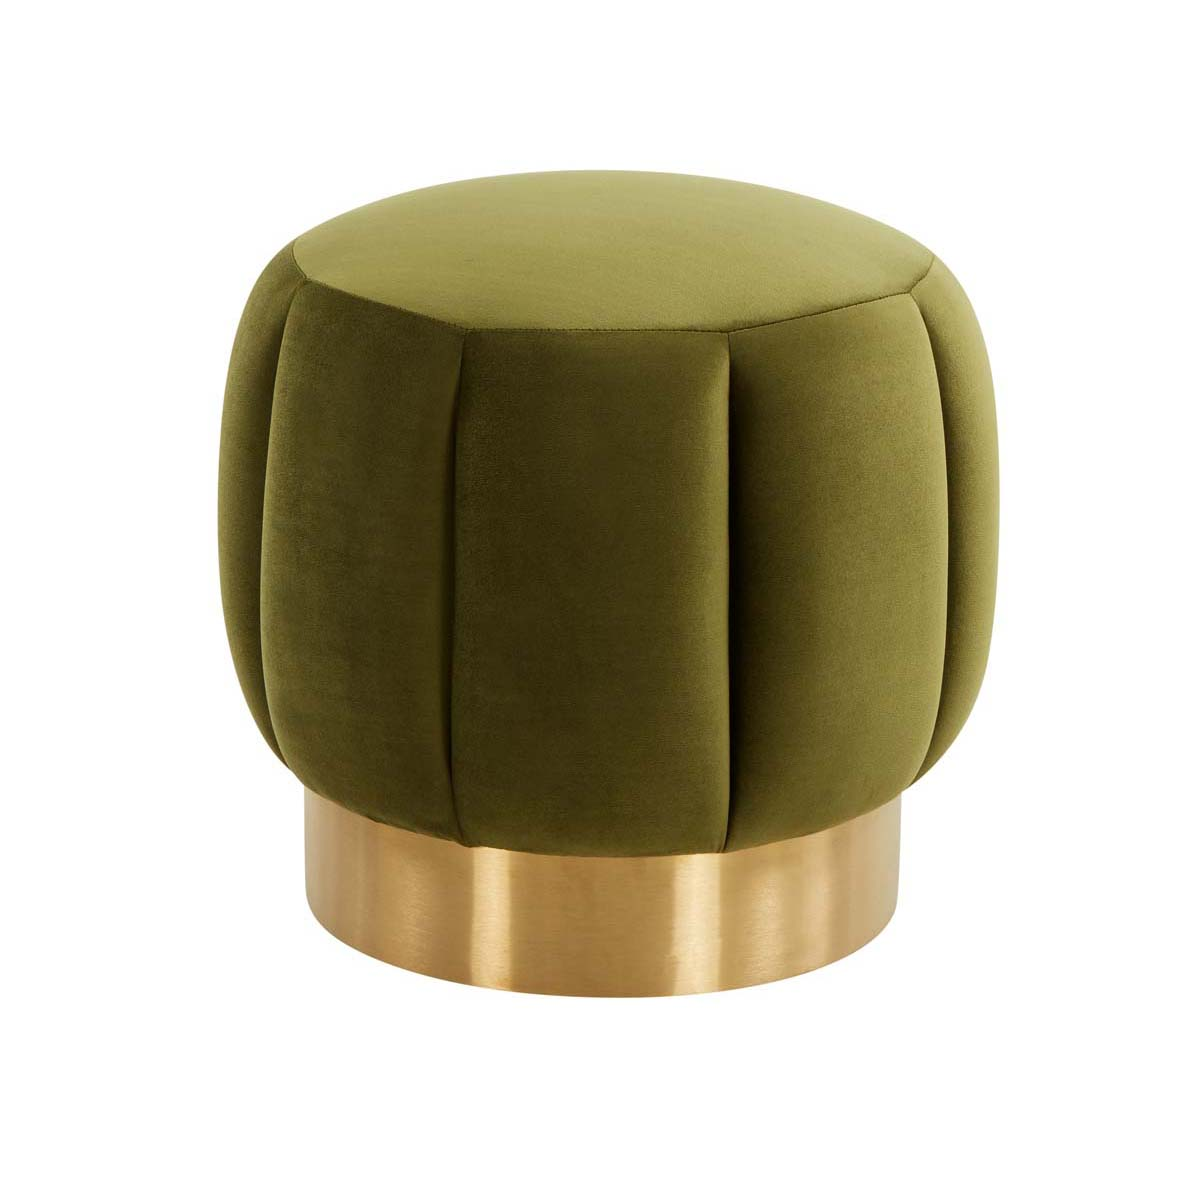 Safavieh Couture Maxine Channel Tufted Otttoman - Olive Green